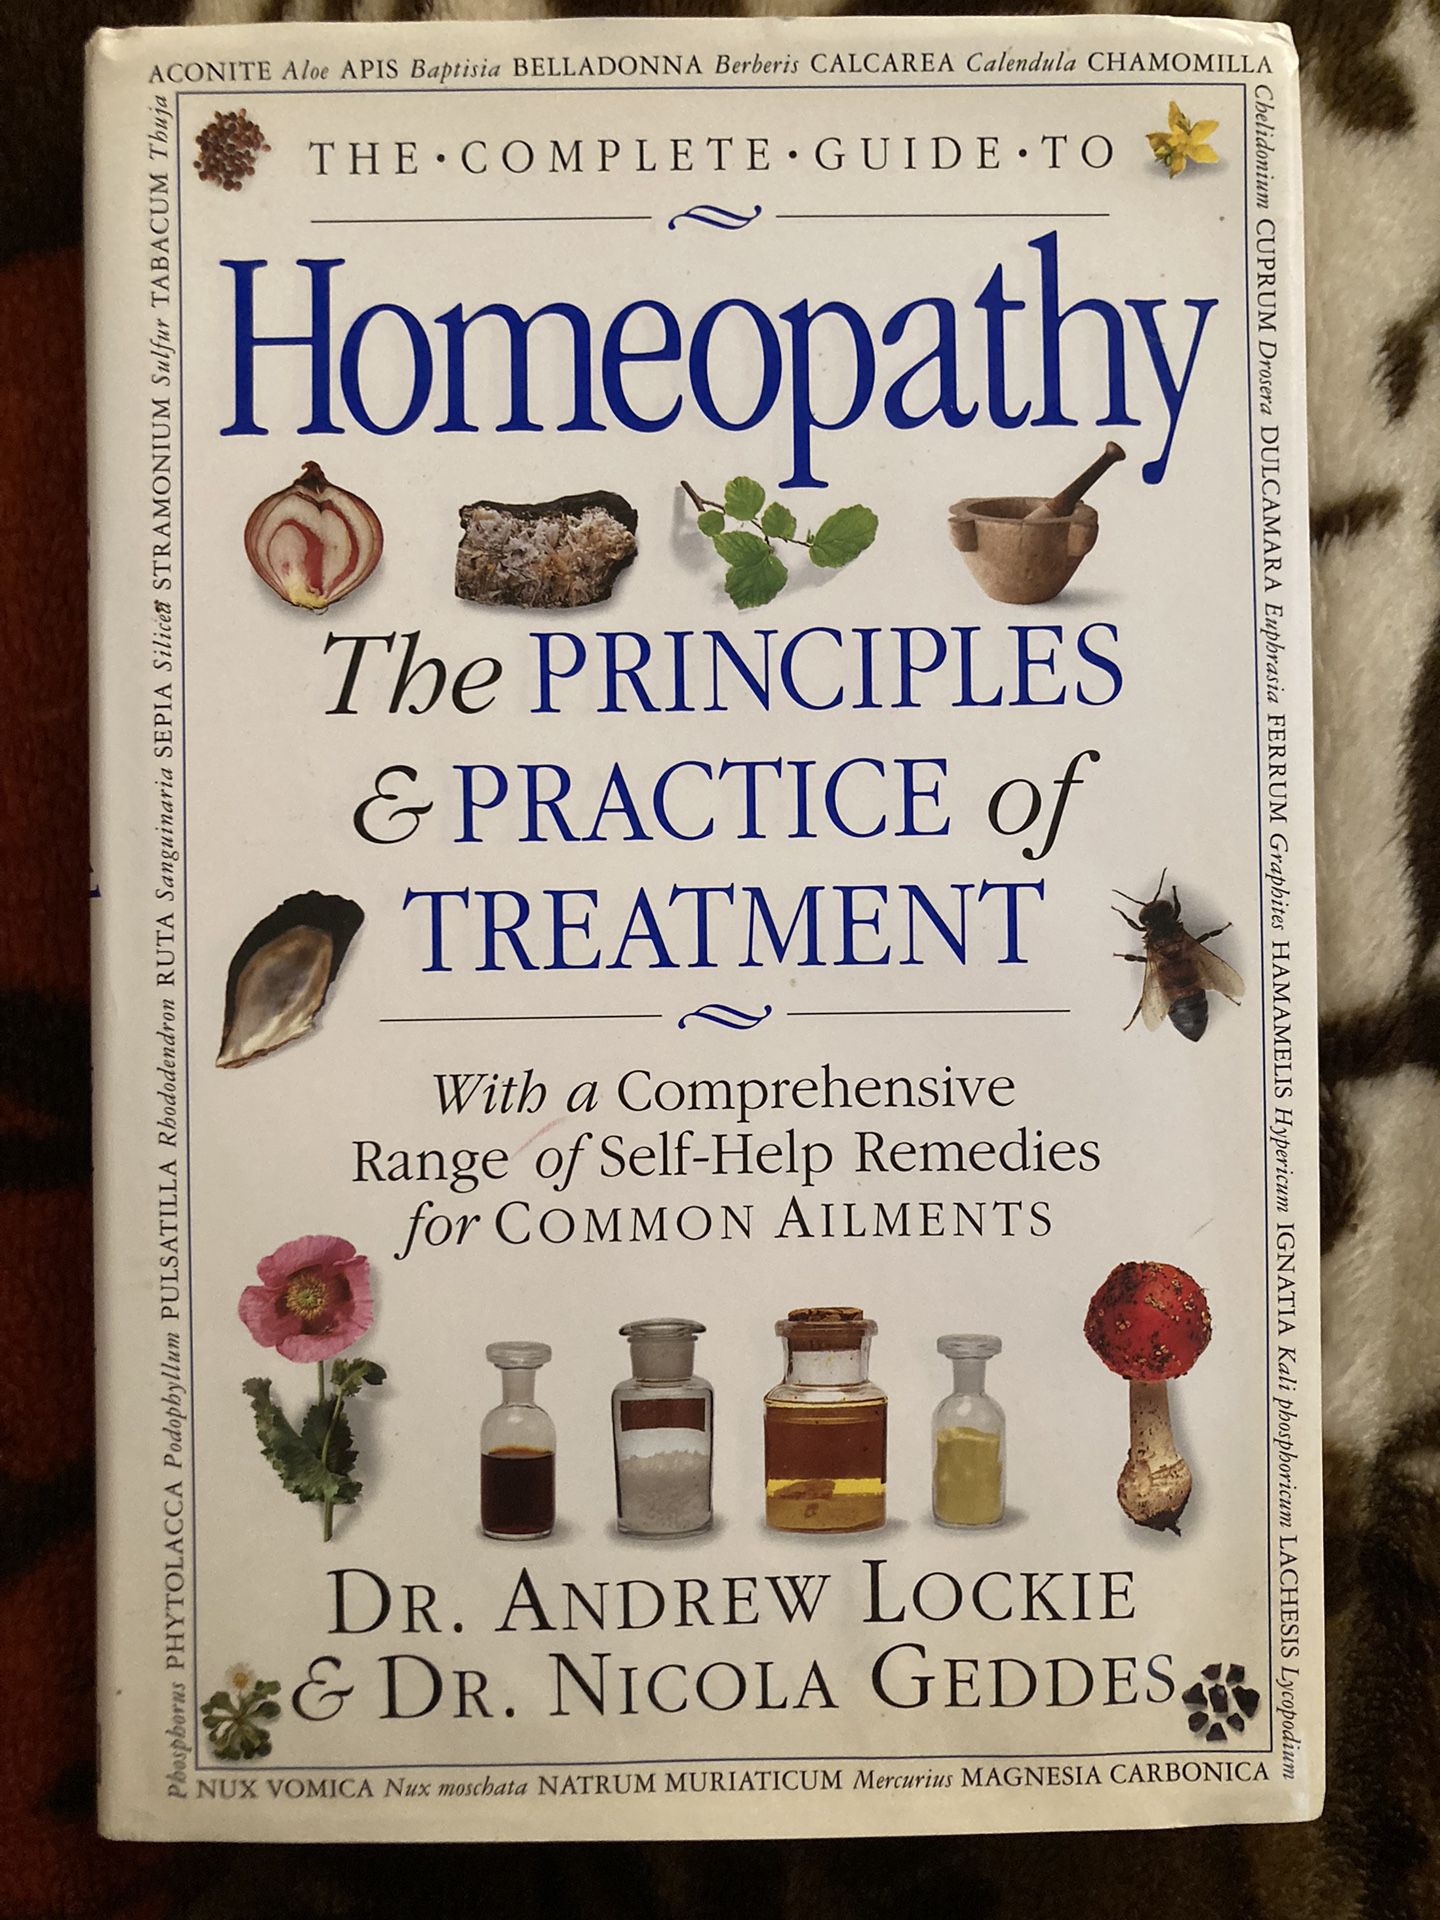 The Complete Guide to Homeopathy: The Principles and Practice of Treatment